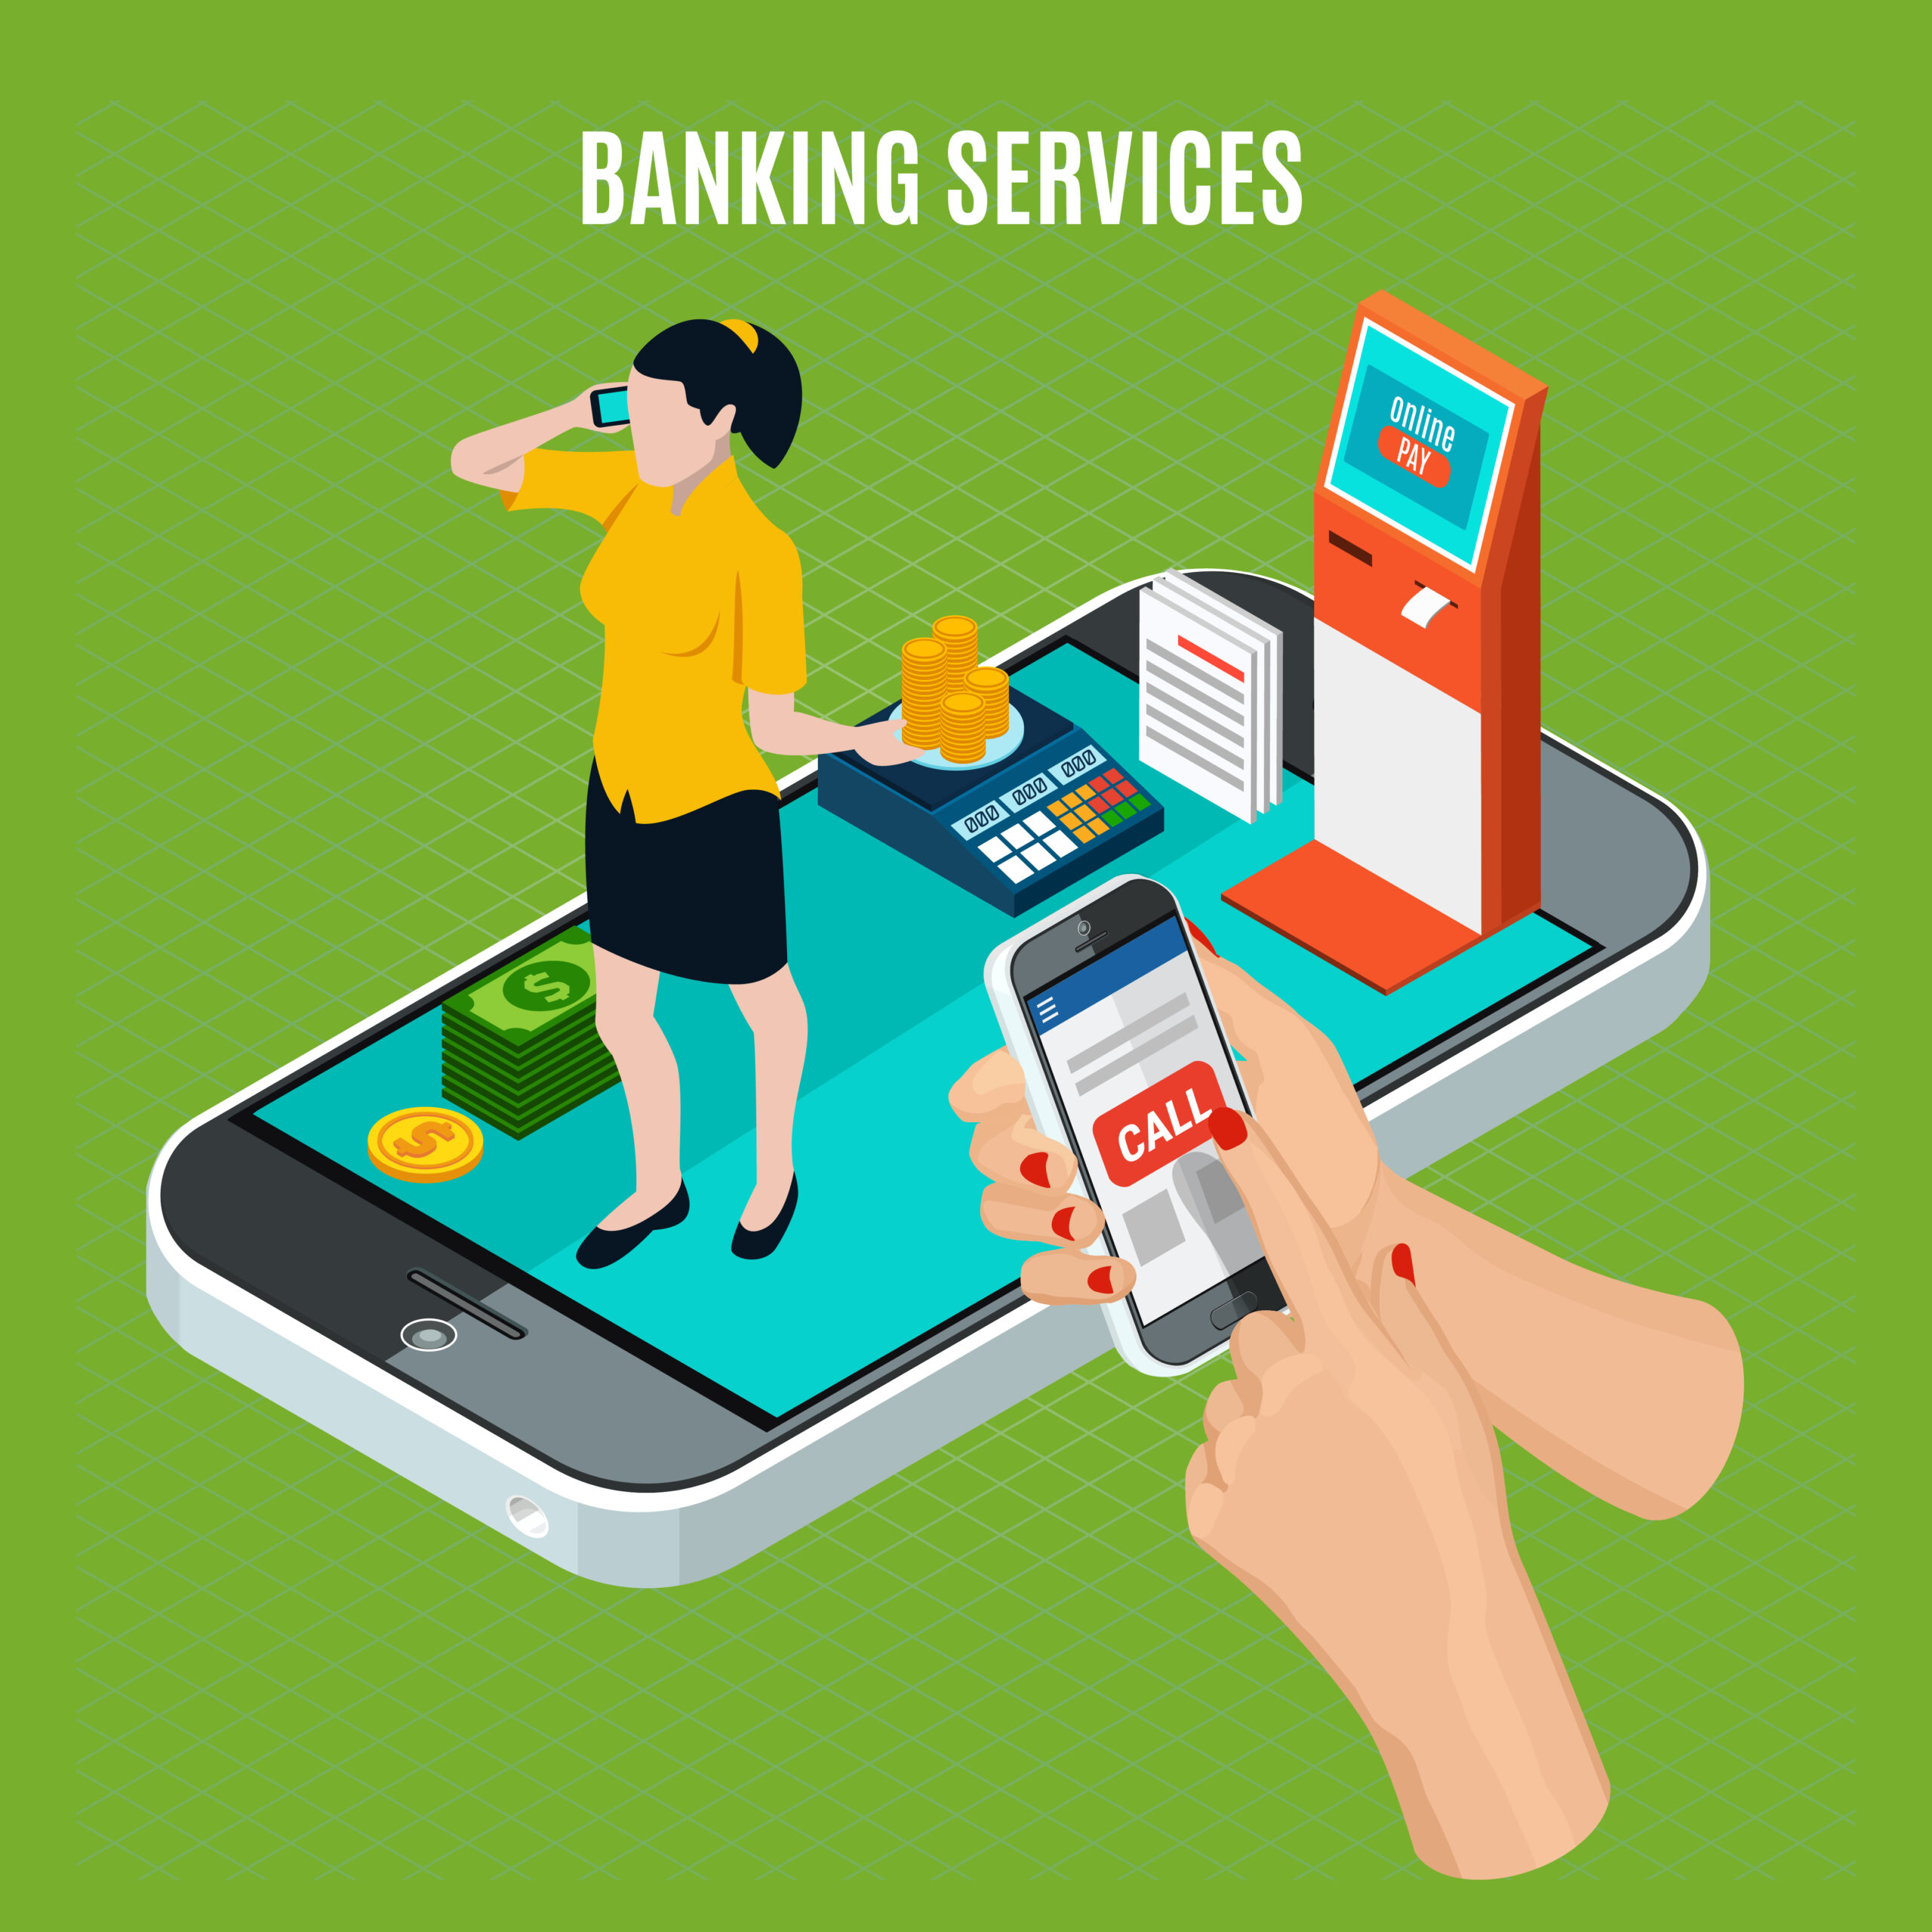 Branch ATM Locator: Digitizing Bank Branches and ATM Services